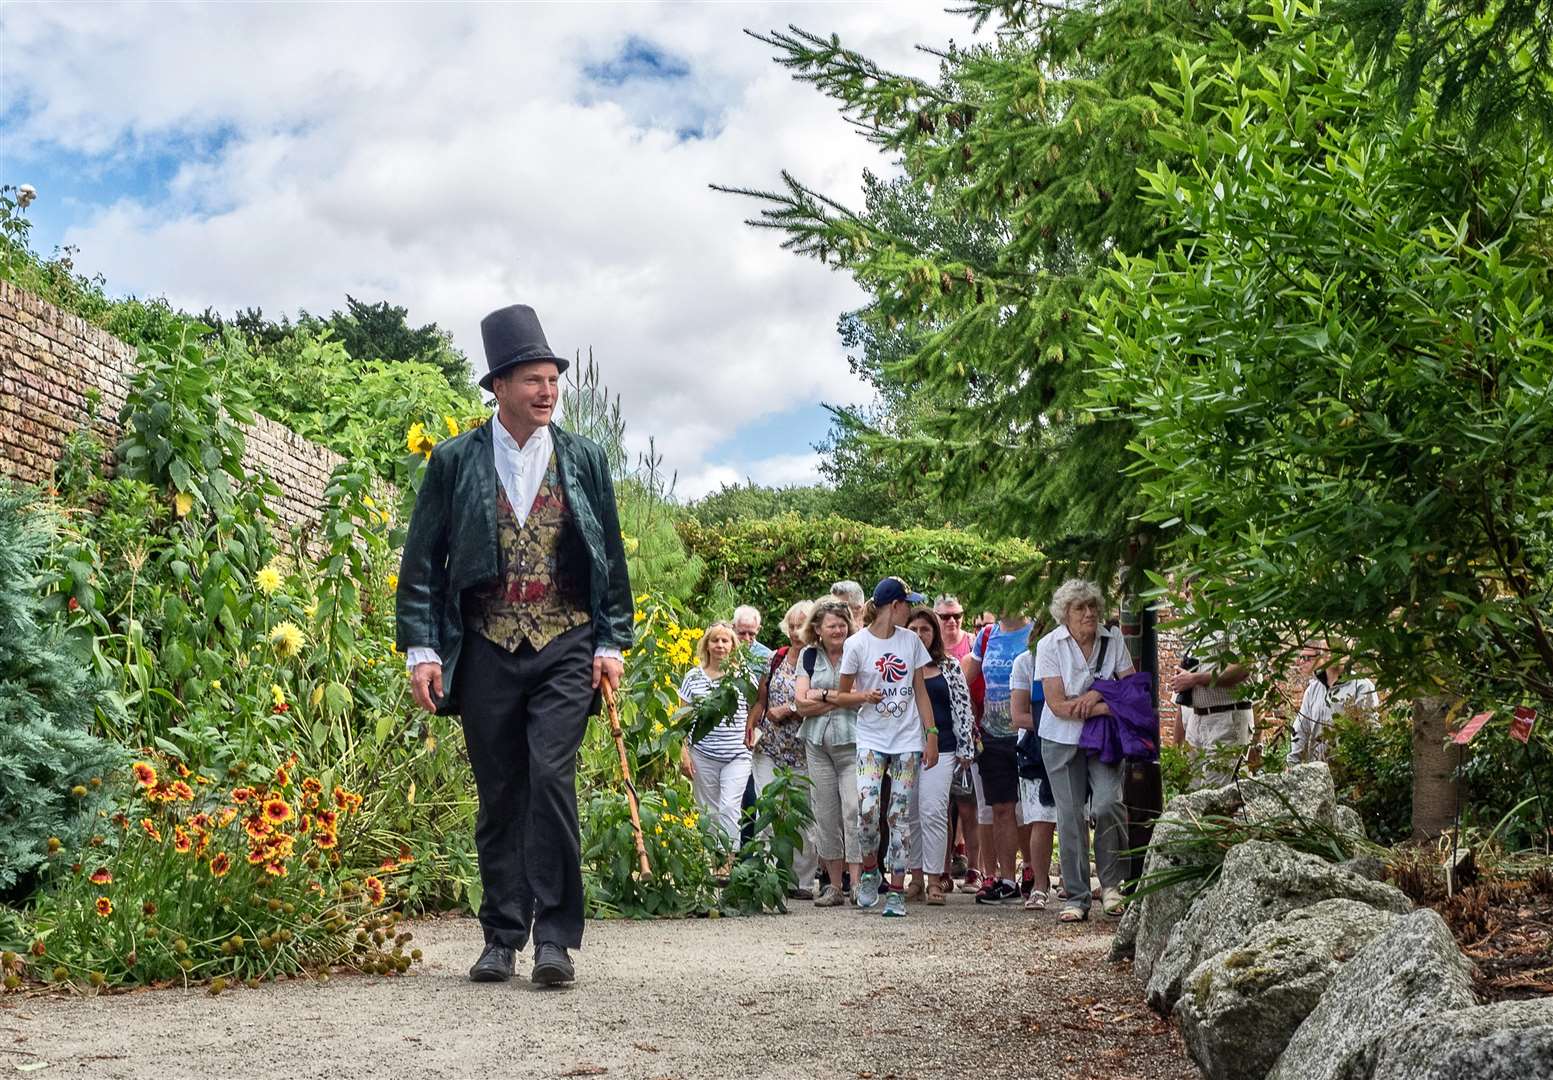 Lullingstone Castle stages its Plant Hunters' Weekend